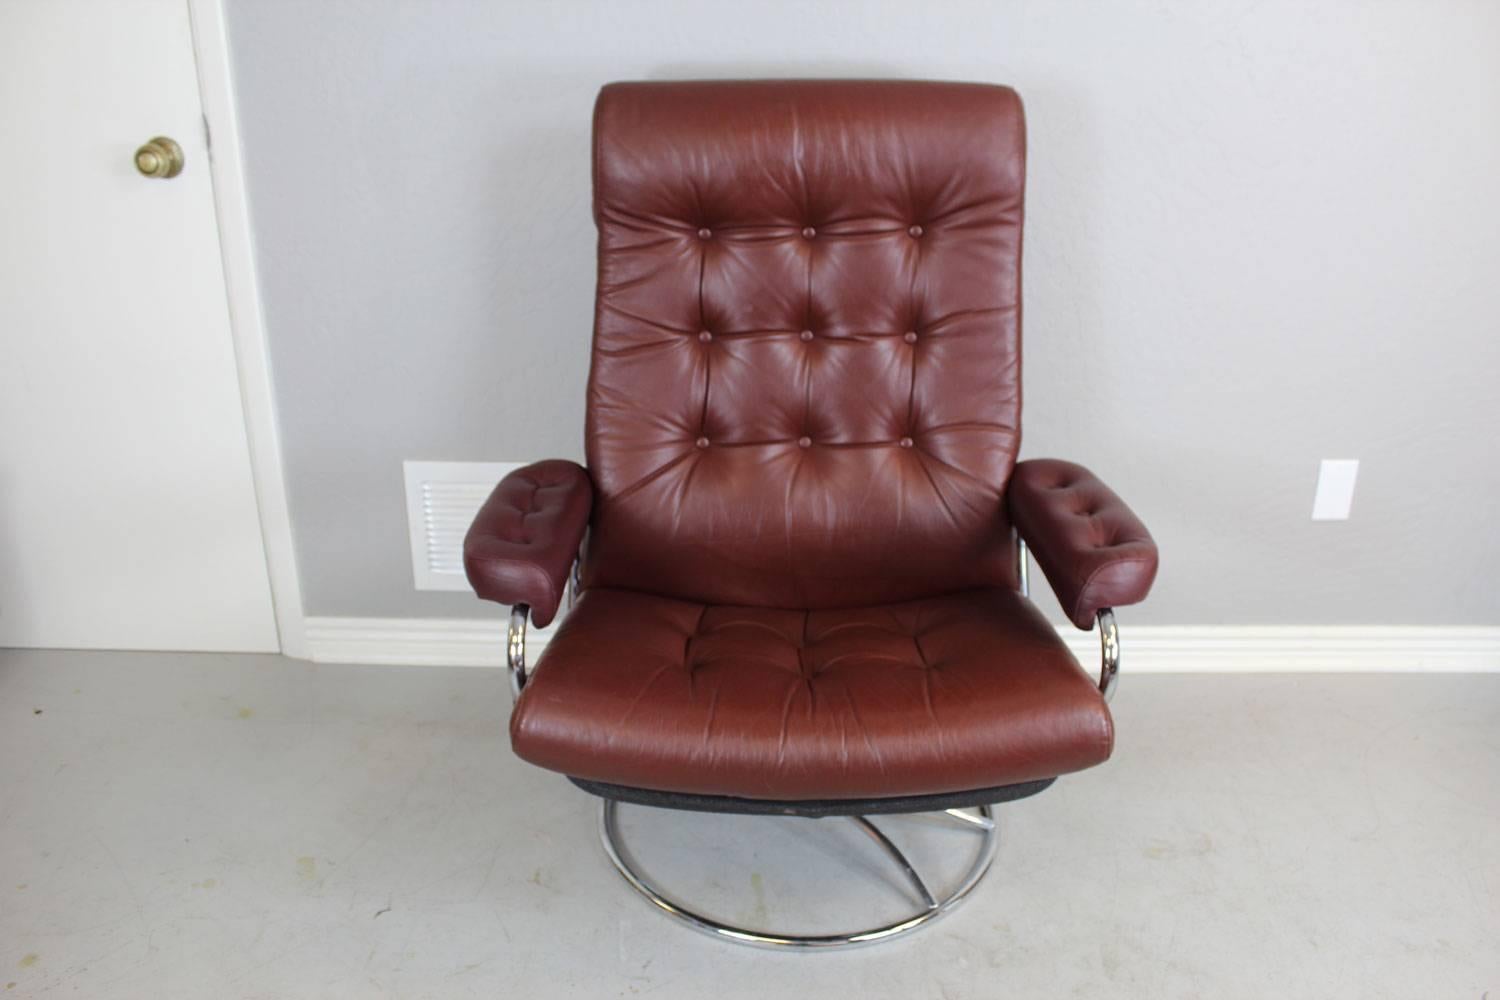 Mid-Century Modern chair and ottoman by Ekornes featuring tufted leather upholstery. This chair reclines and swivels. 

Ottoman dimensions: 21